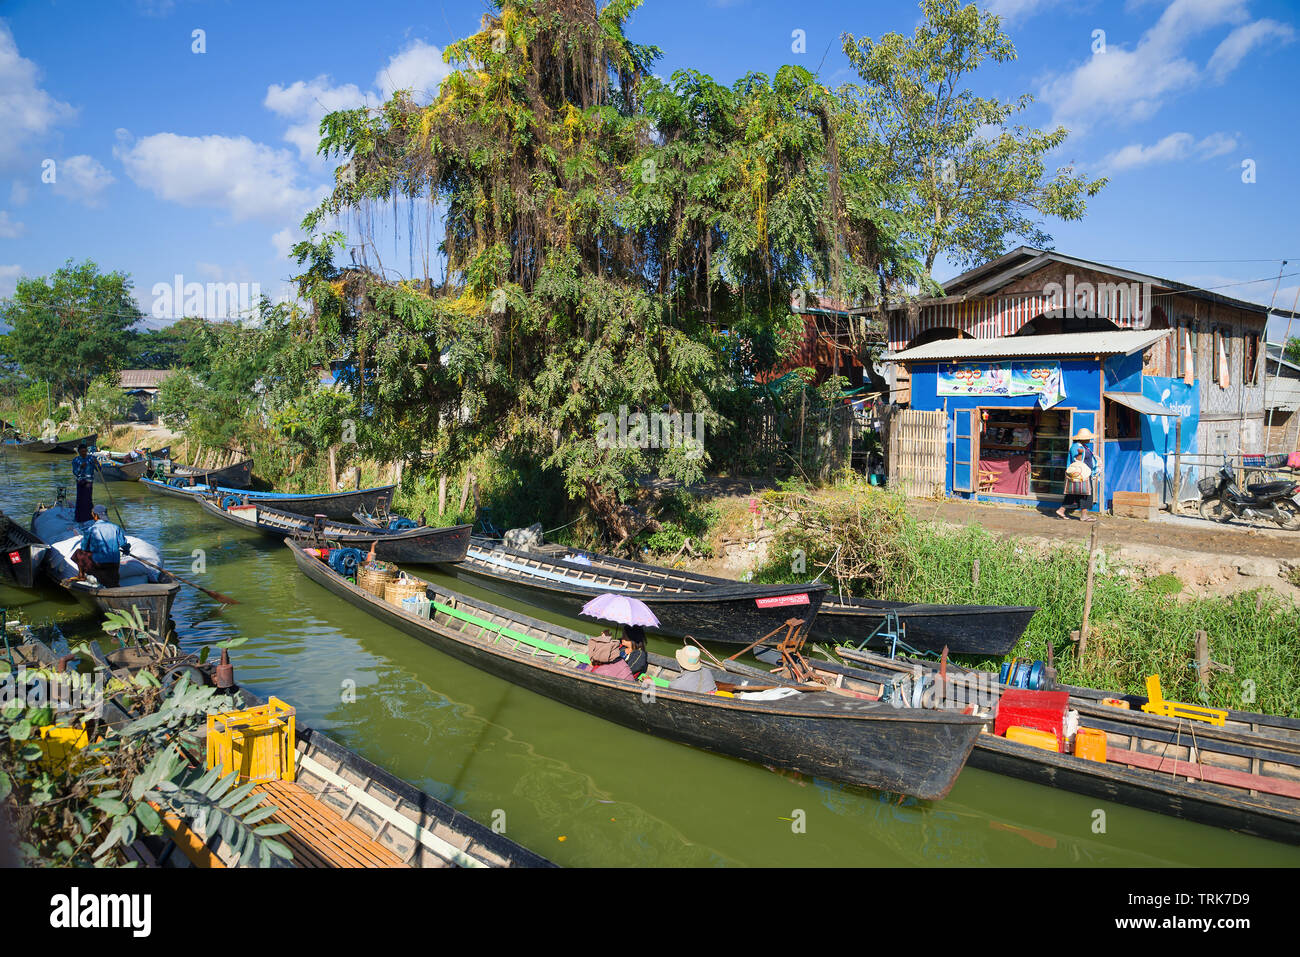 NYAUNG SHWE, MYANMAR - DECEMBER 26, 2016: Sunny day on the city canal Stock Photo